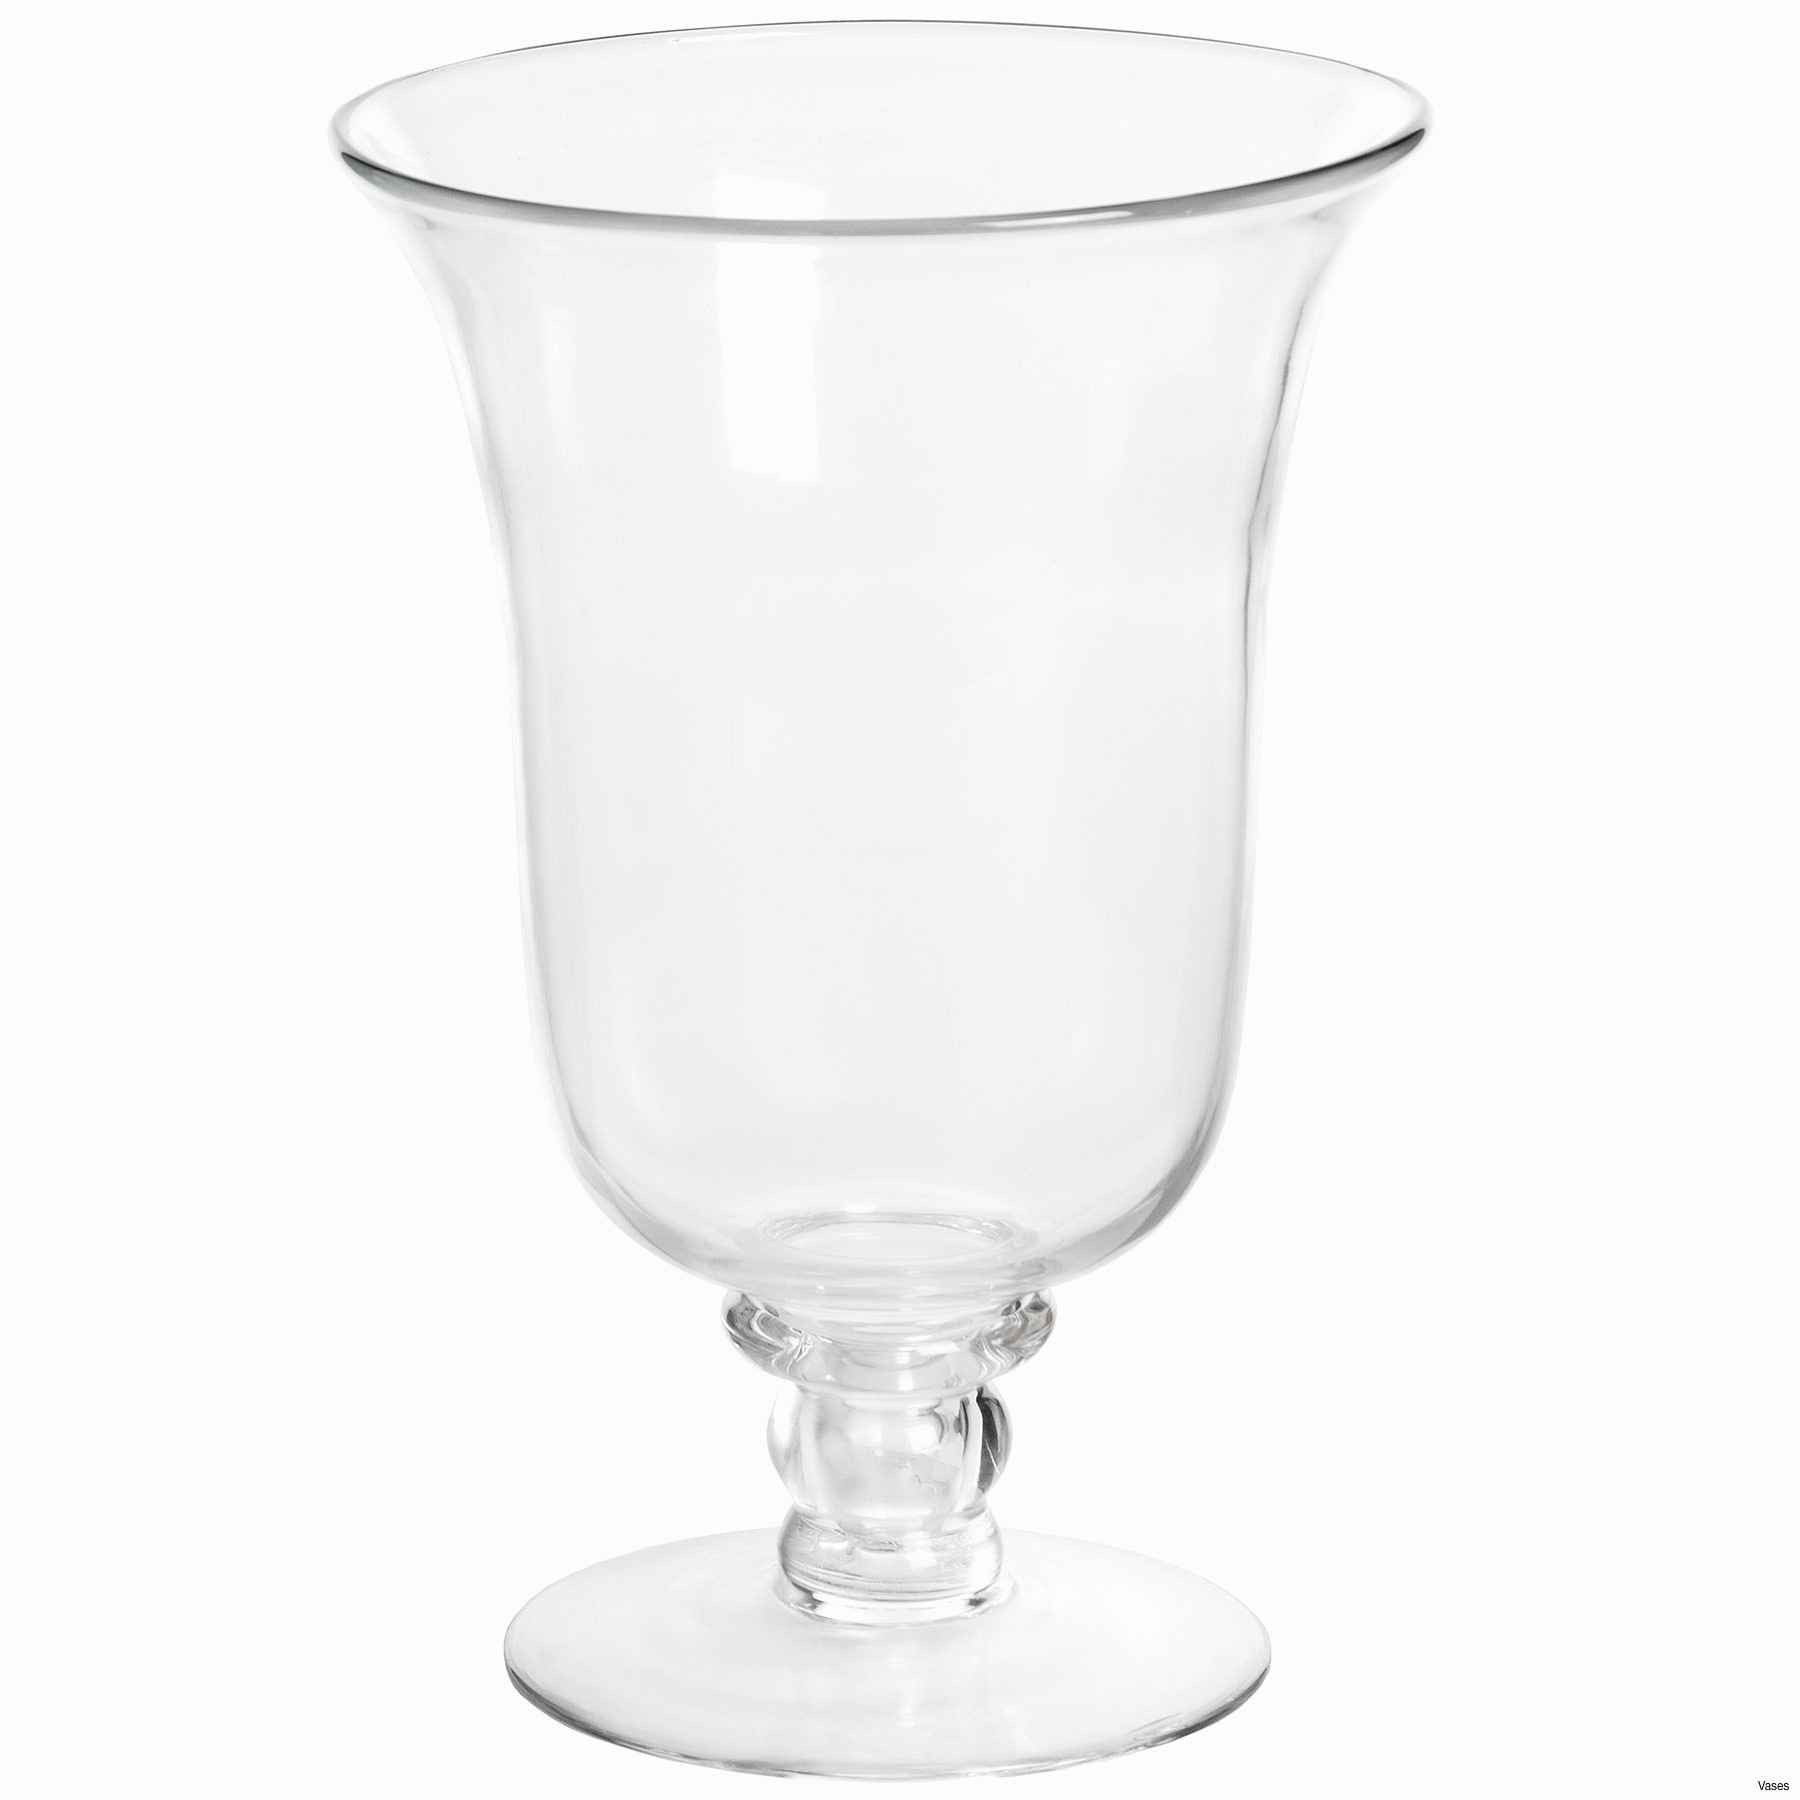 16 Wonderful White Glass Vase 2024 free download white glass vase of candle stands wholesale lovely faux crystal candle holders alive regarding candle stands wholesale lovely faux crystal candle holders alive vases gold tall jpgi 0d cheap 